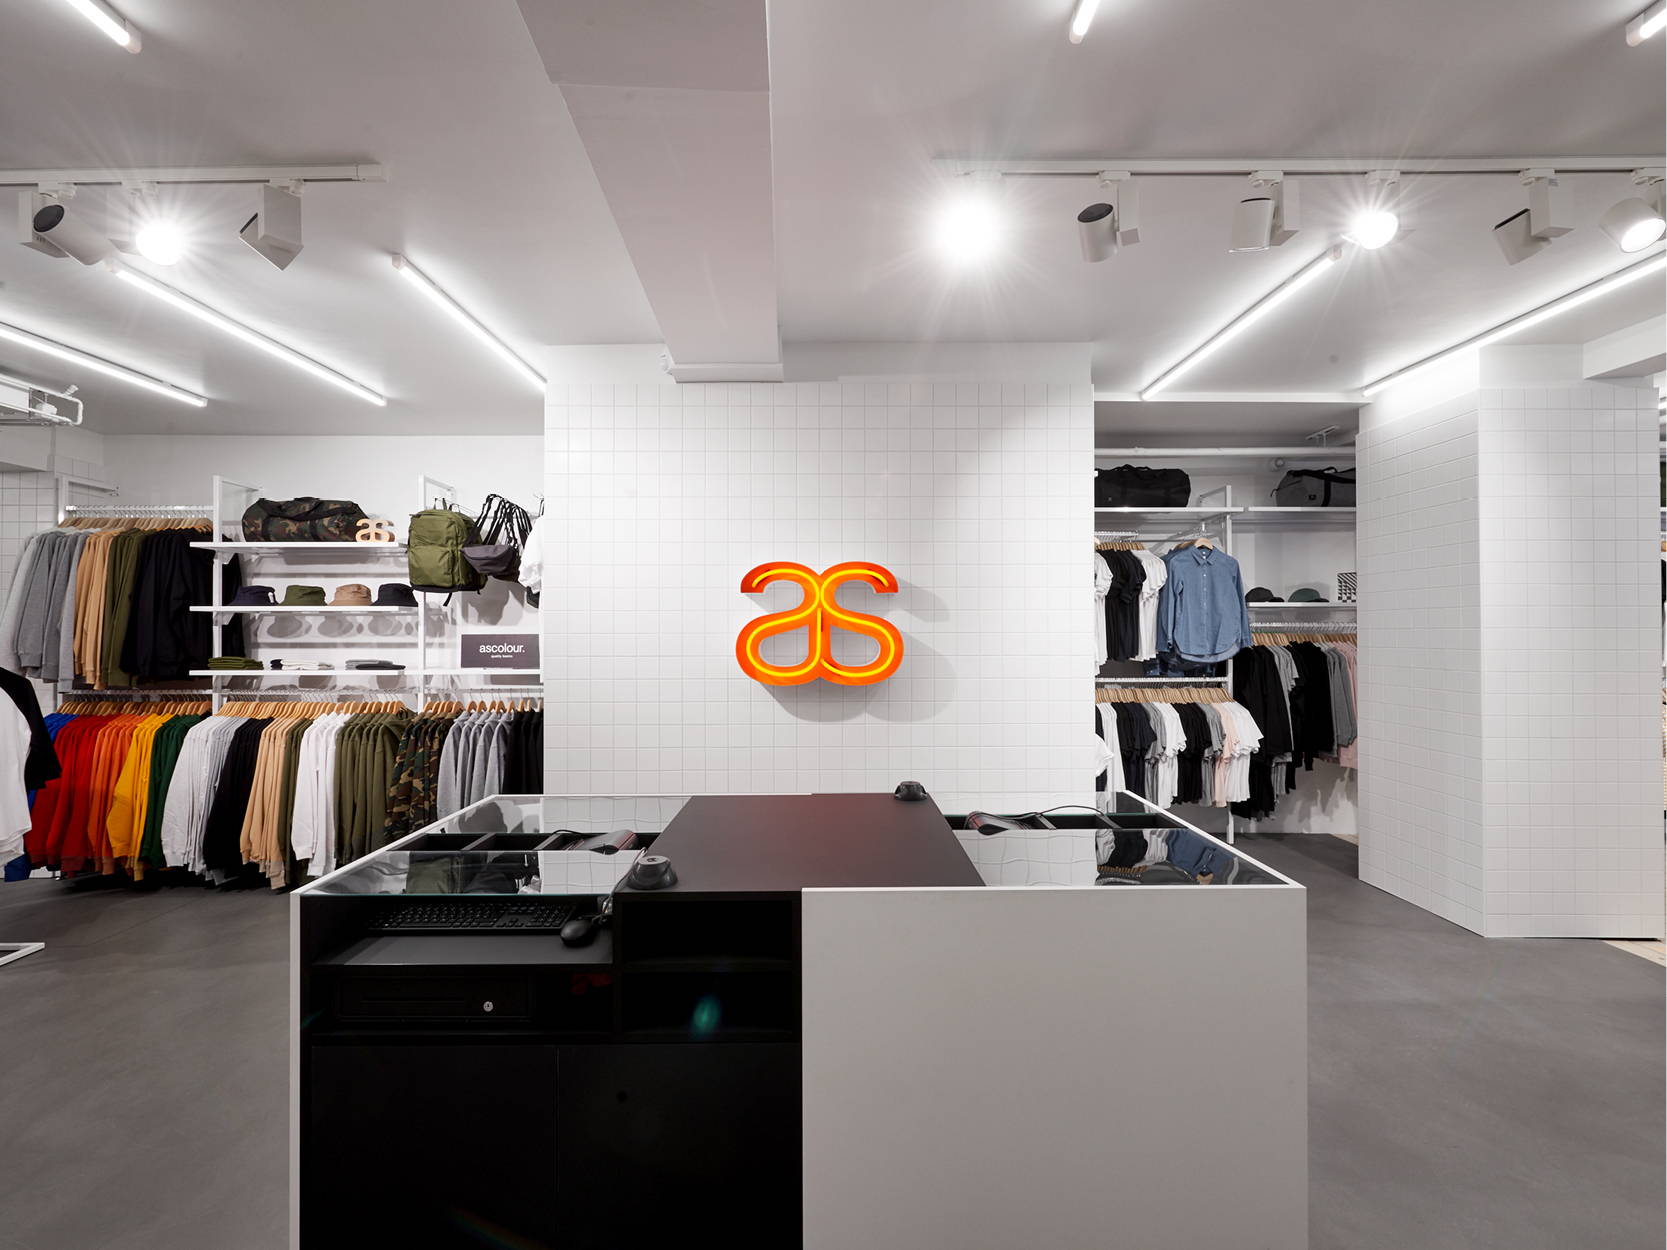 AS Colour Shoreditch inside store featuring the 'as' stylised logo